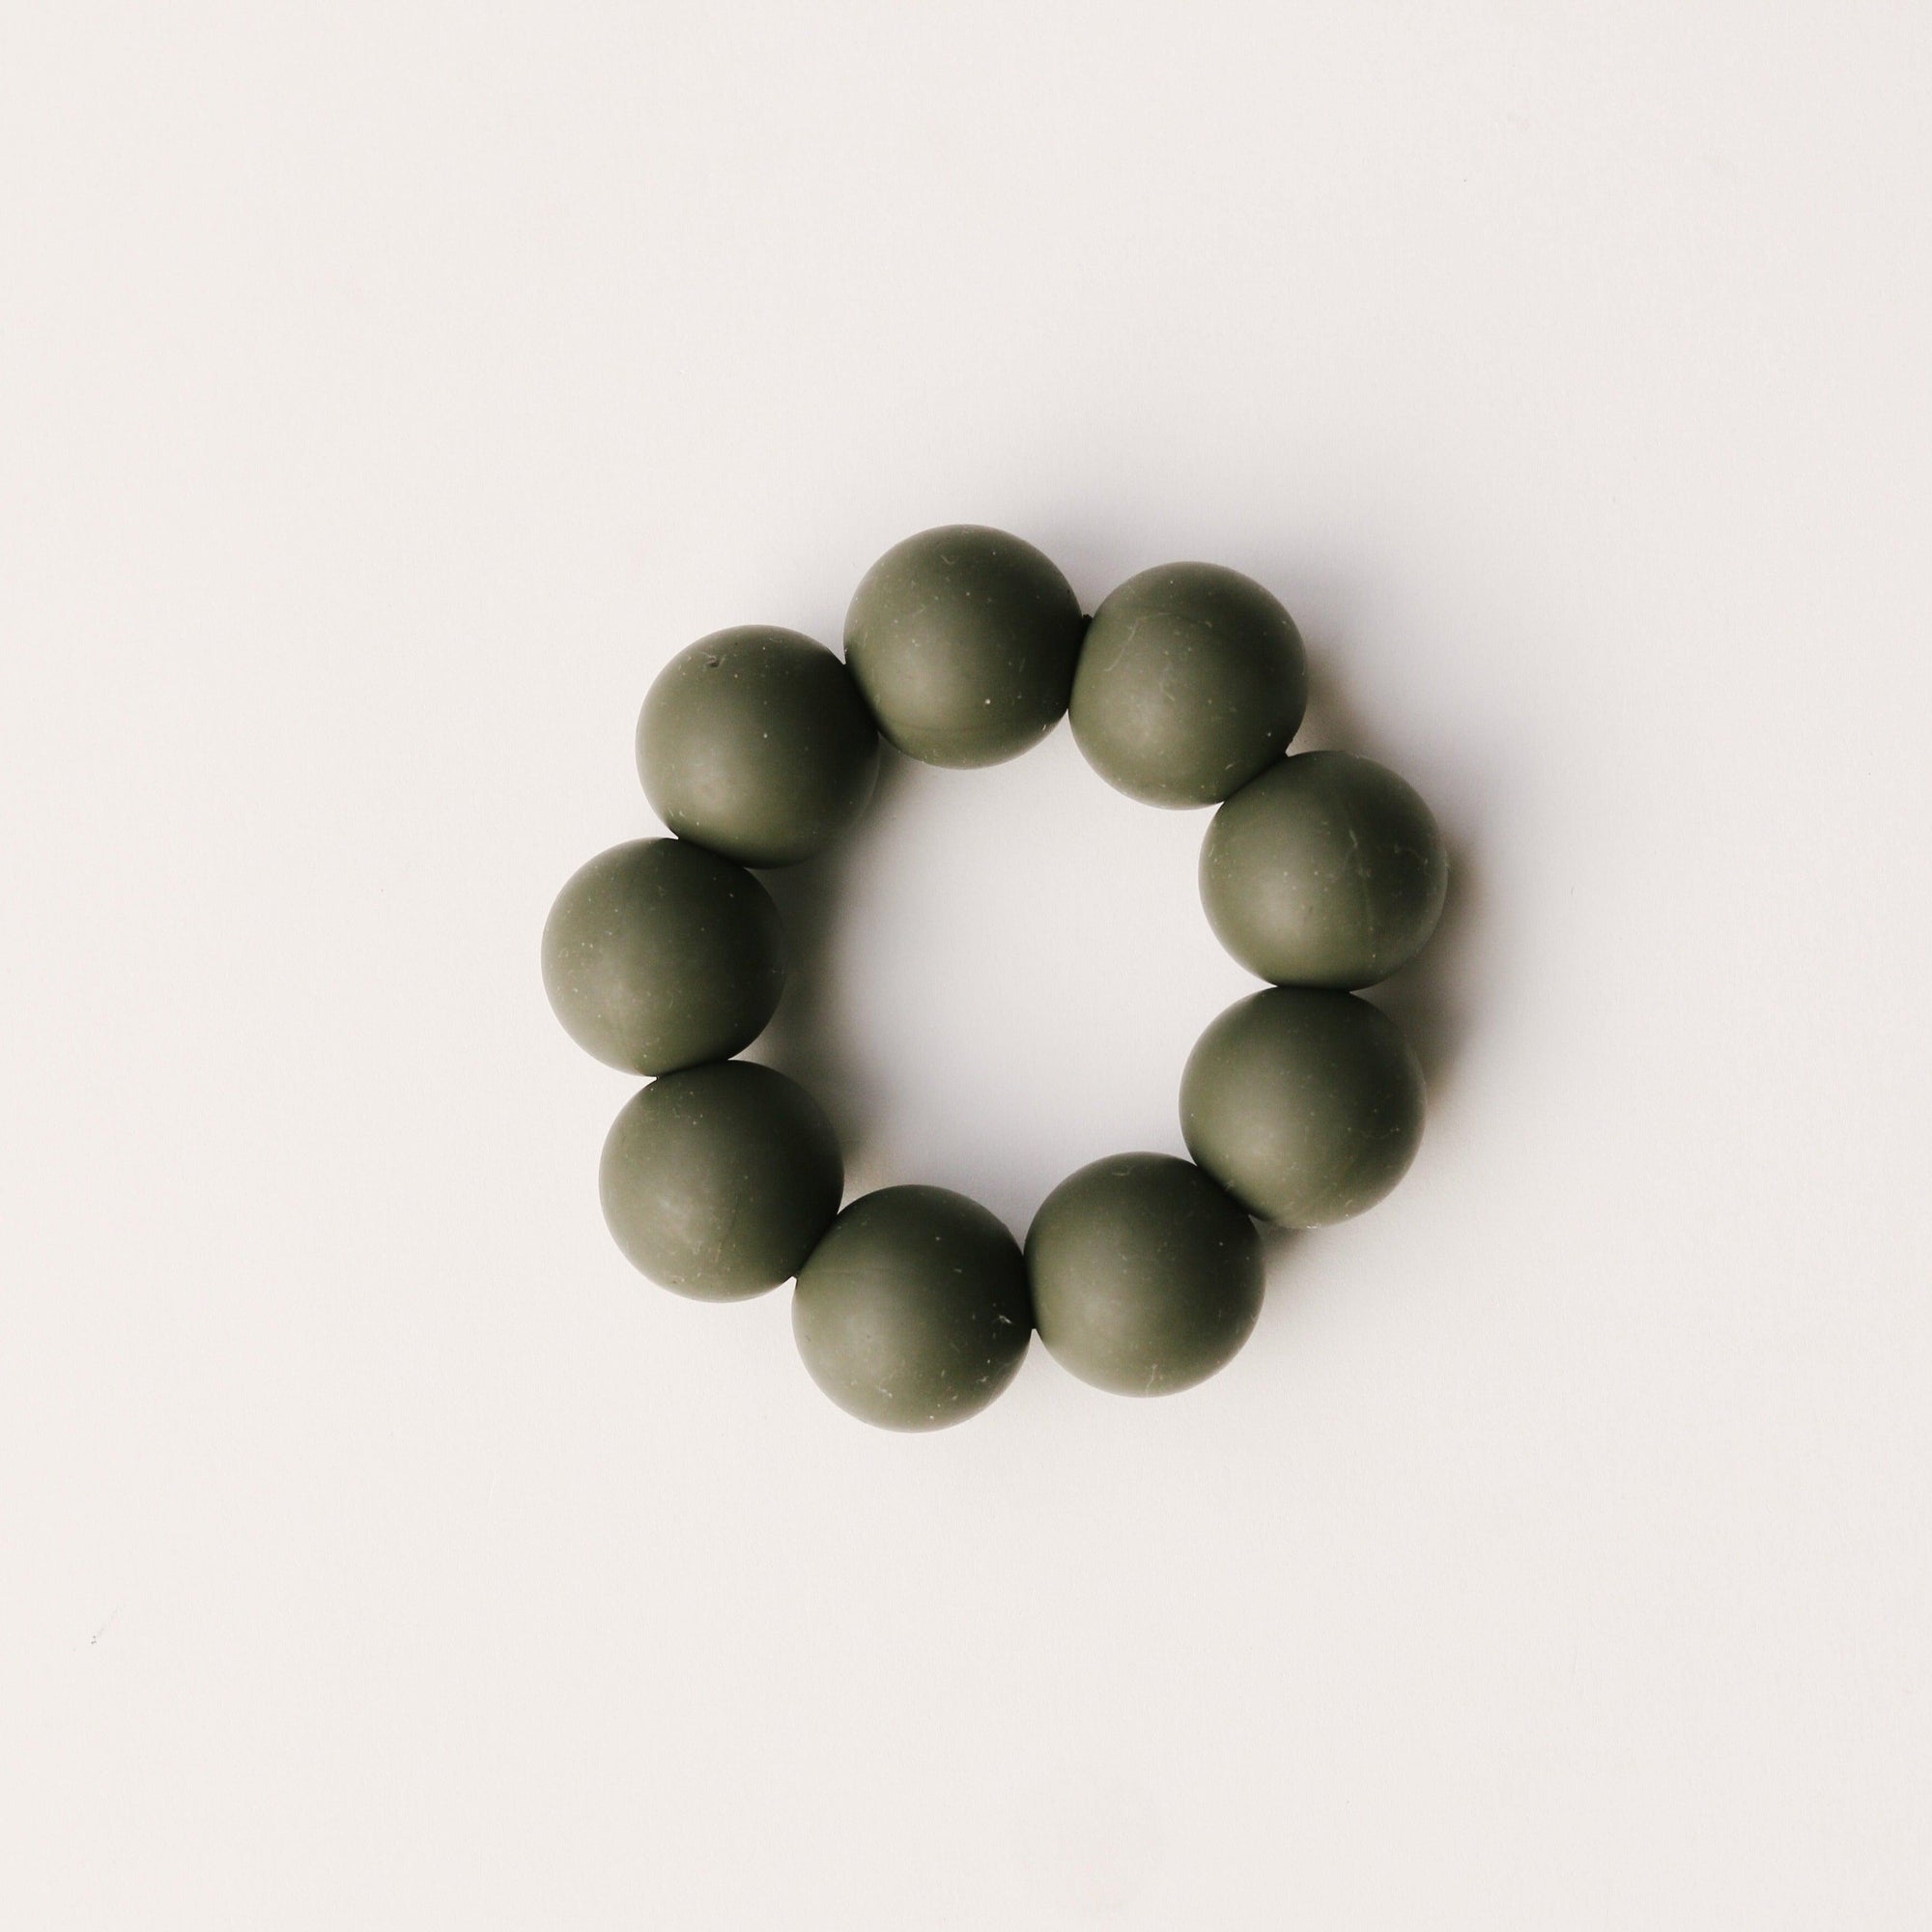 A Dove & Dovelet Silicone Teether in the shade Olive.